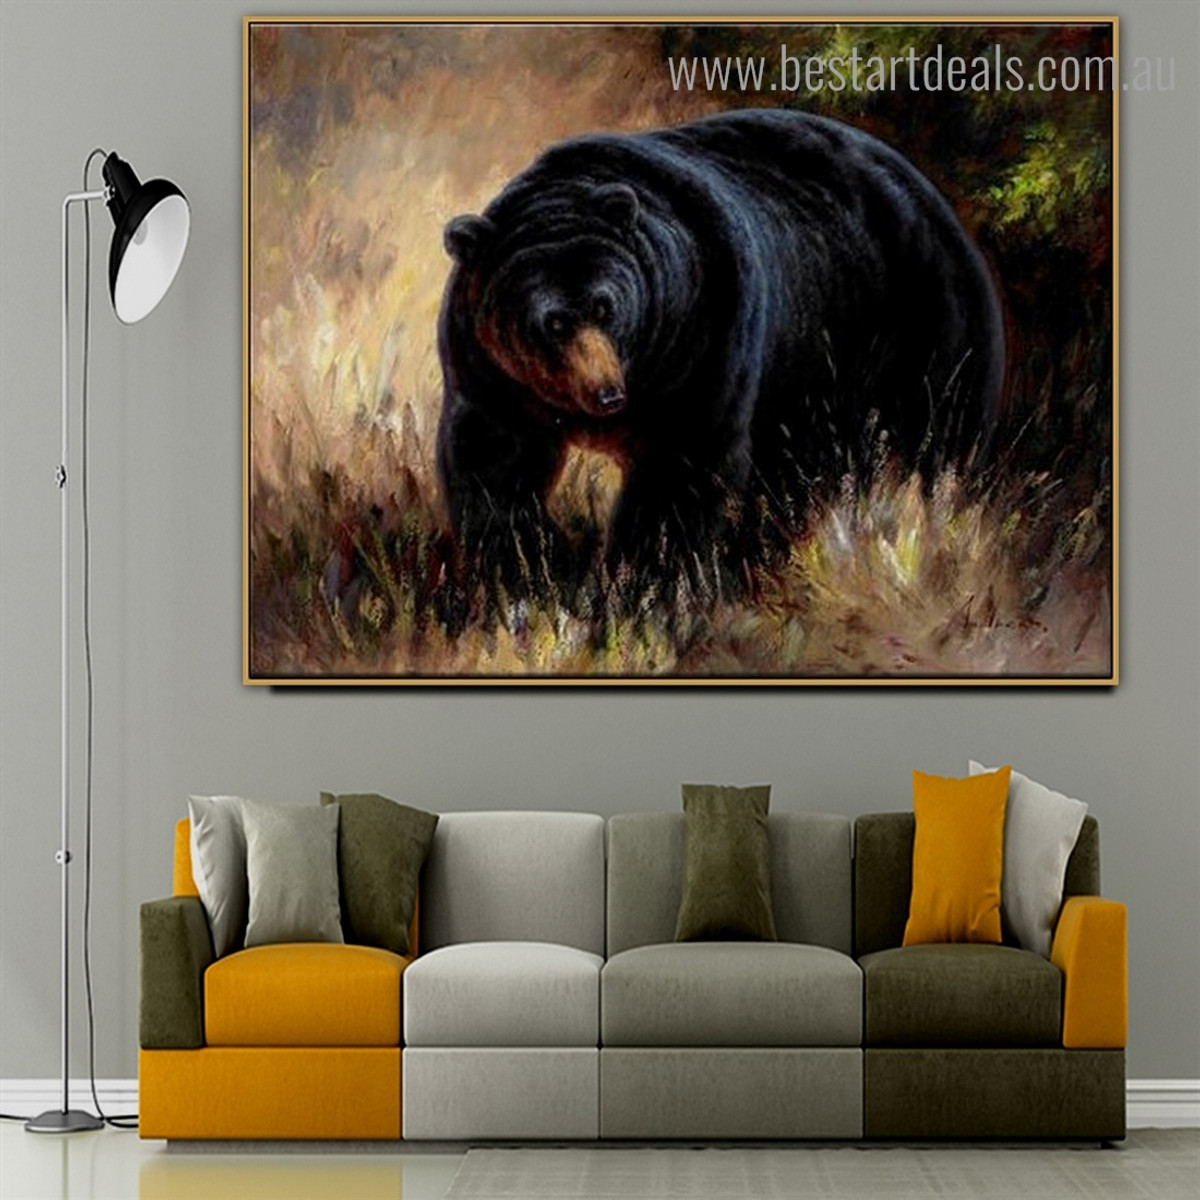 Wild Black Bruin Animal Nature Framed Painting Image Canvas Print for Room Wall Outfit